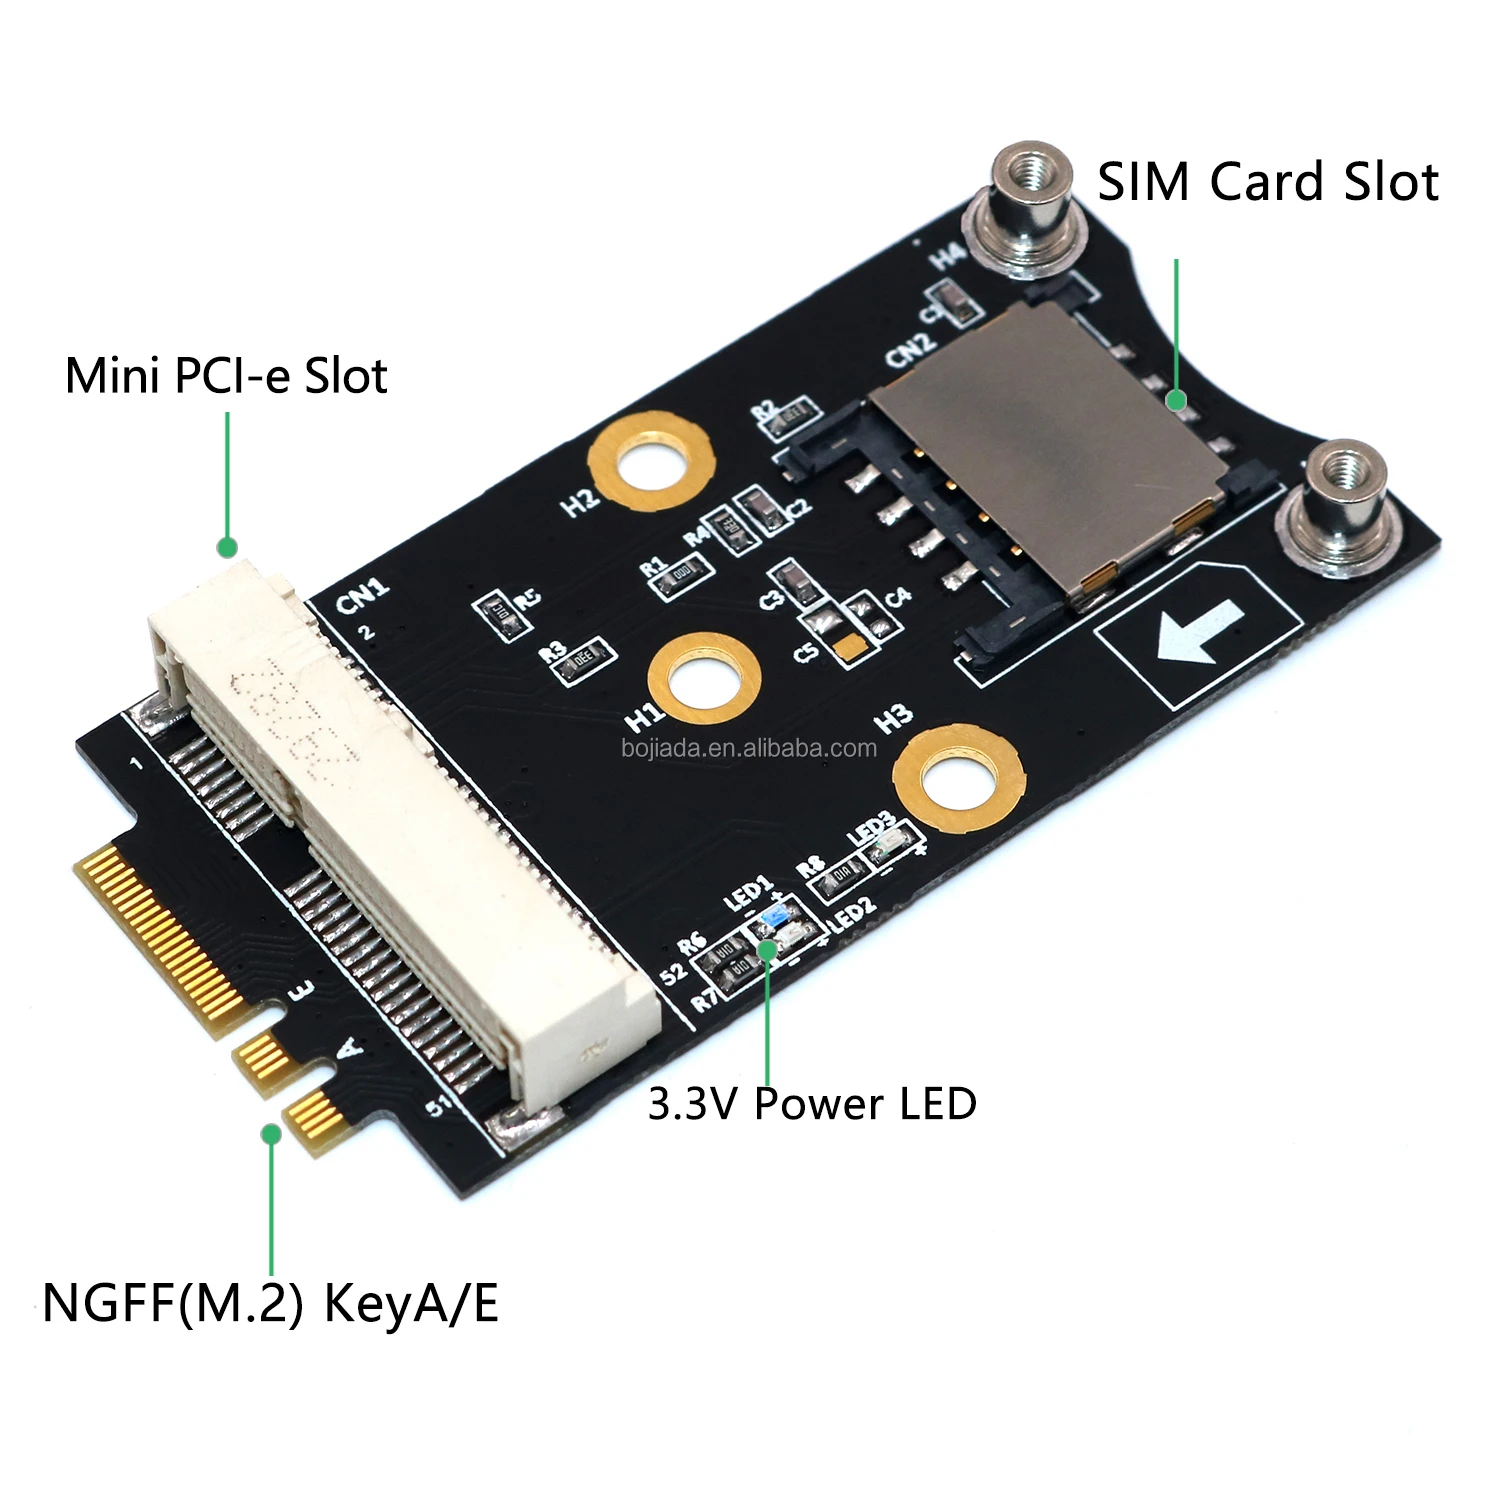 2 ngff key a/e riser card with sim slot in stock